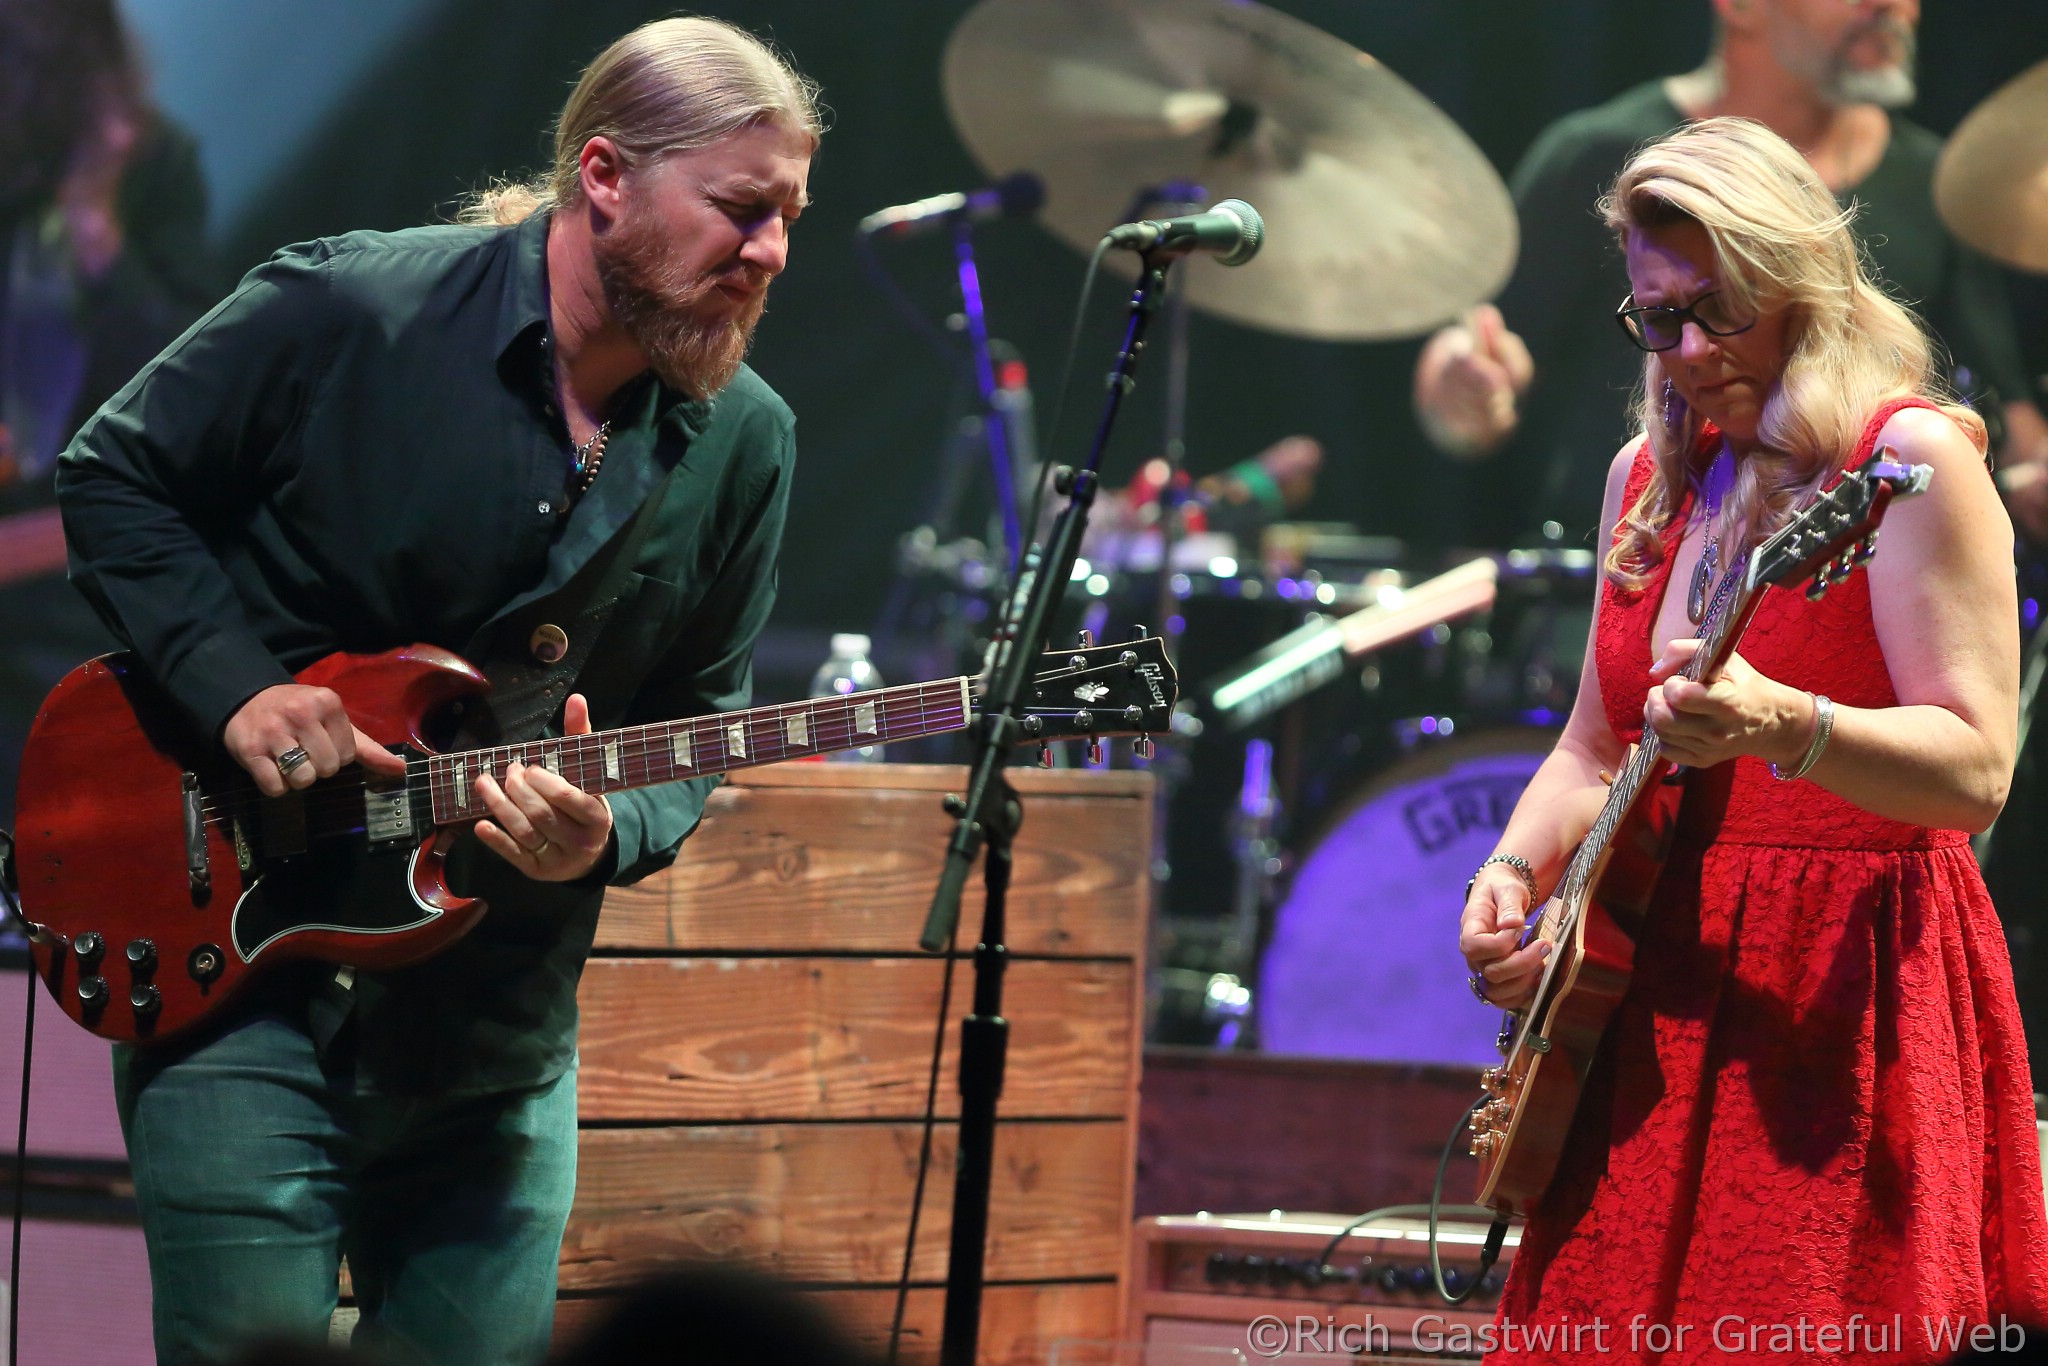 TEDESCHI TRUCKS BAND GEARS UP FOR SIX-NIGHT BEACON THEATRE RESIDENCY